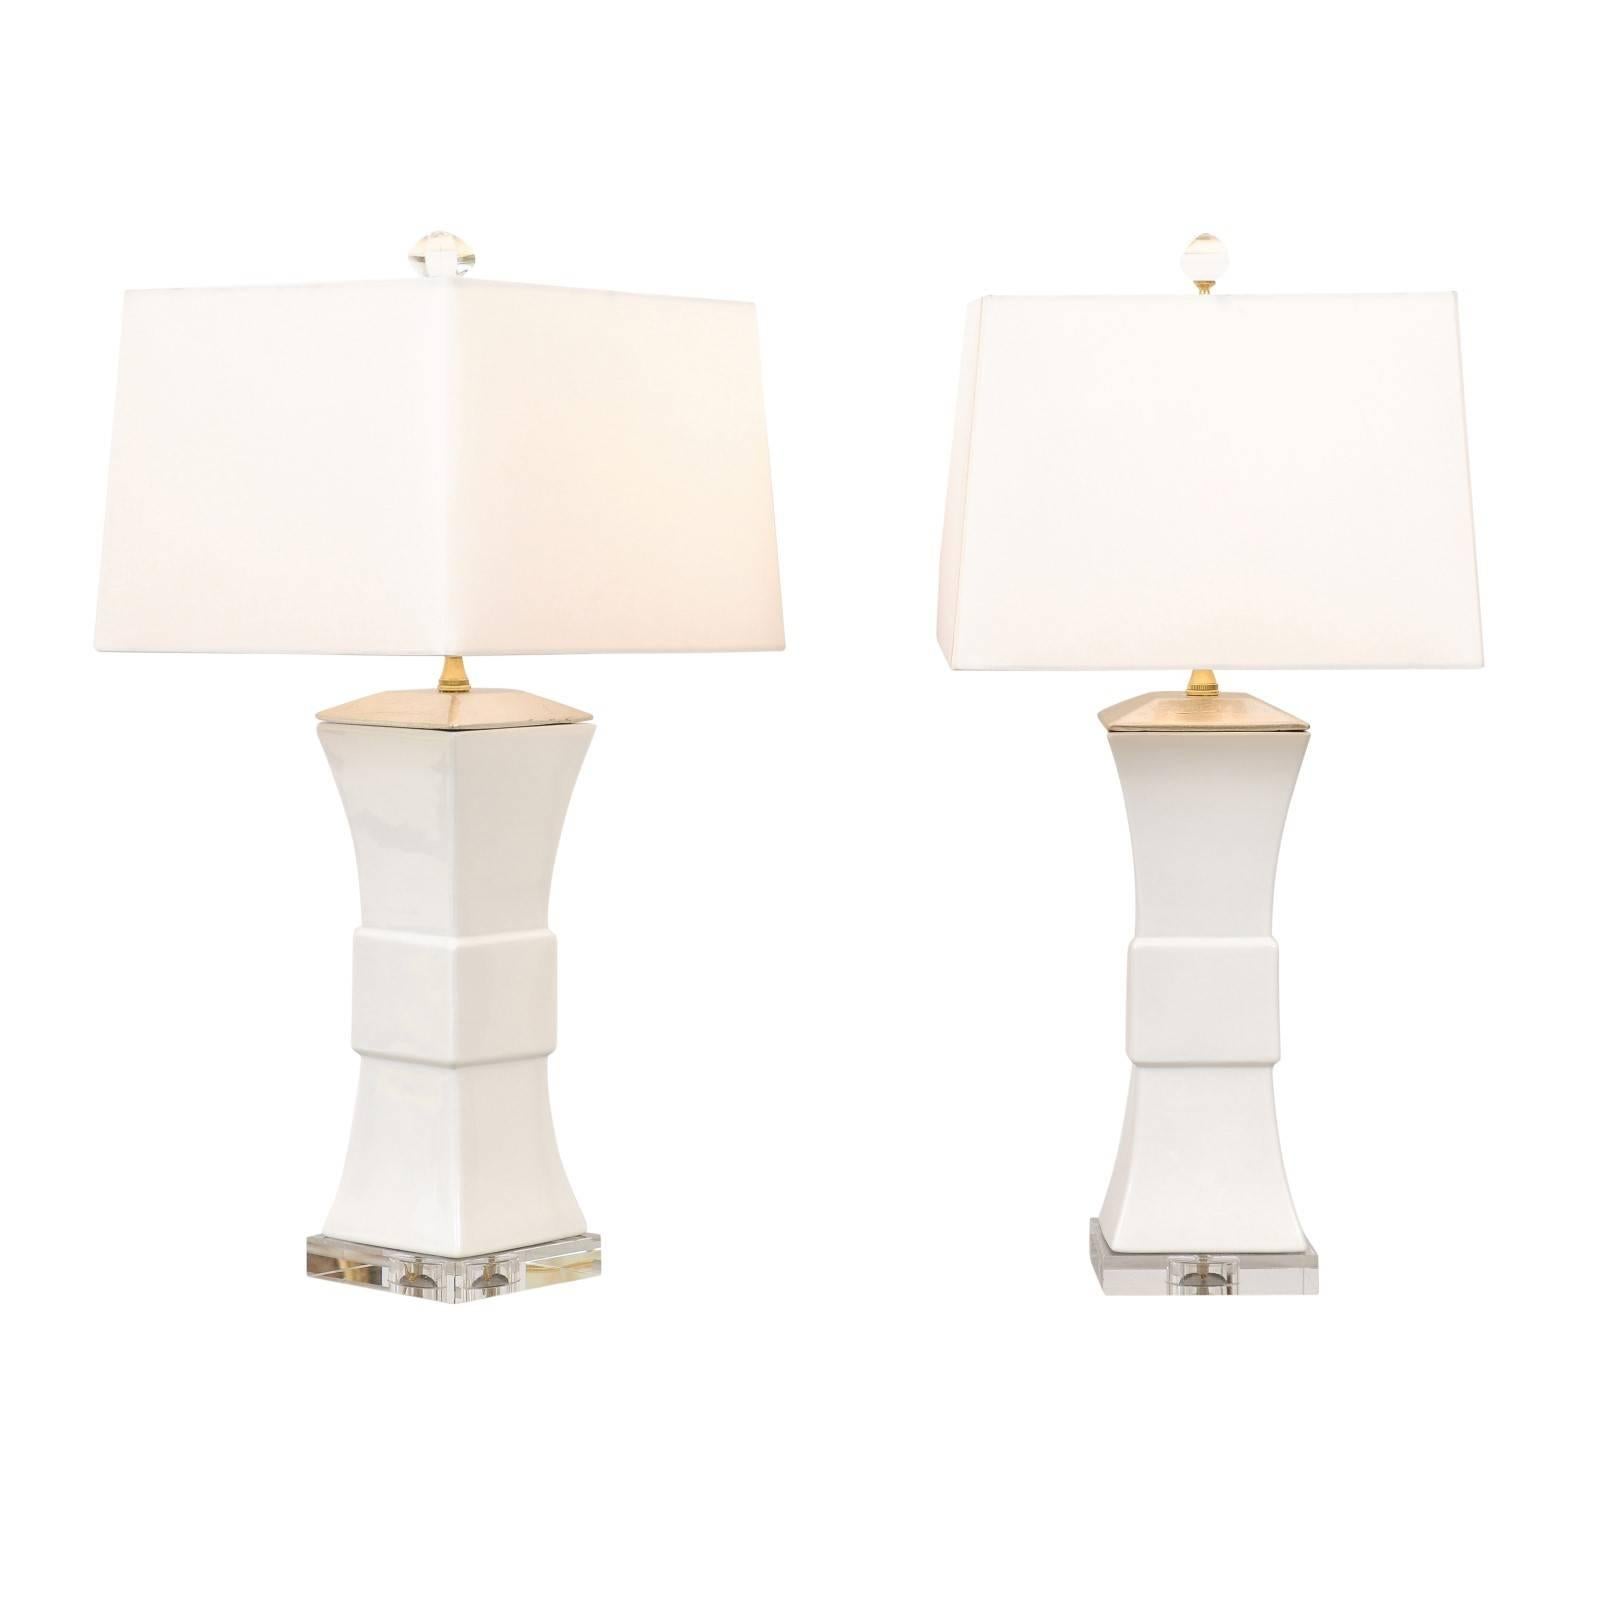 Pair of Contemporary White Porcelain Concave Table Lamps on Square Crystal Bases